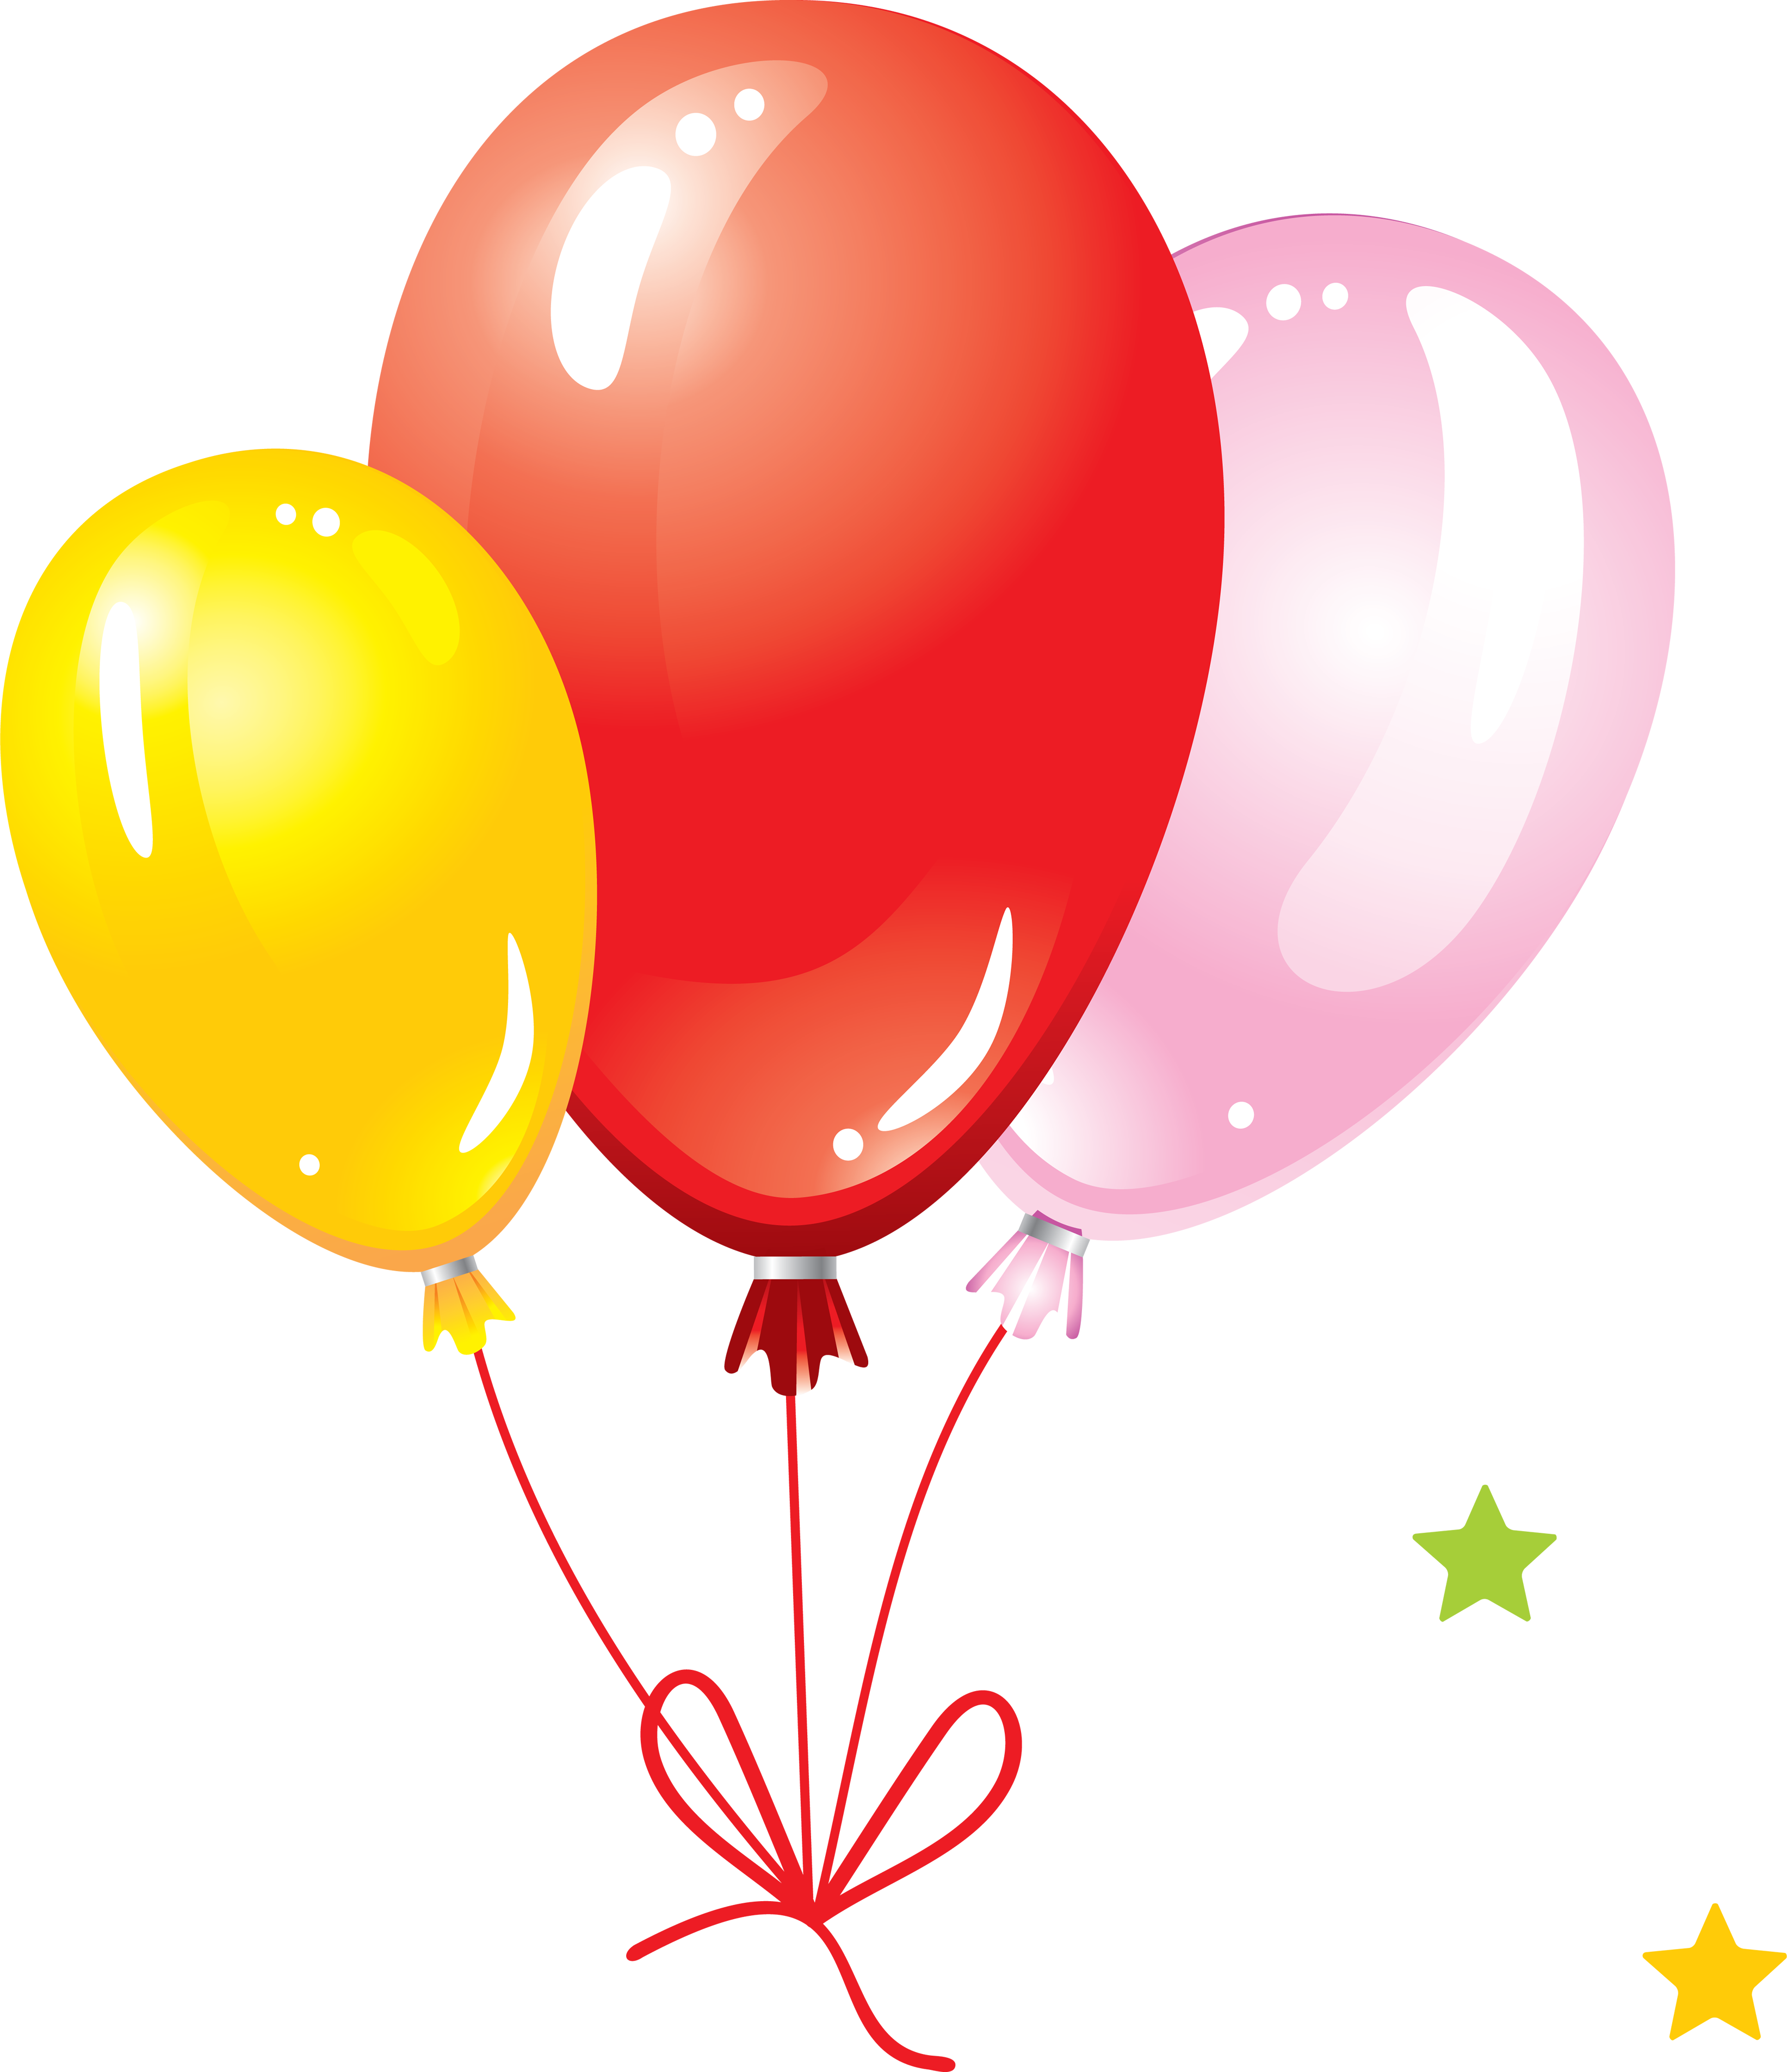 Download PNG Image Balloon PNG Image Free Download Balloons | TheMins